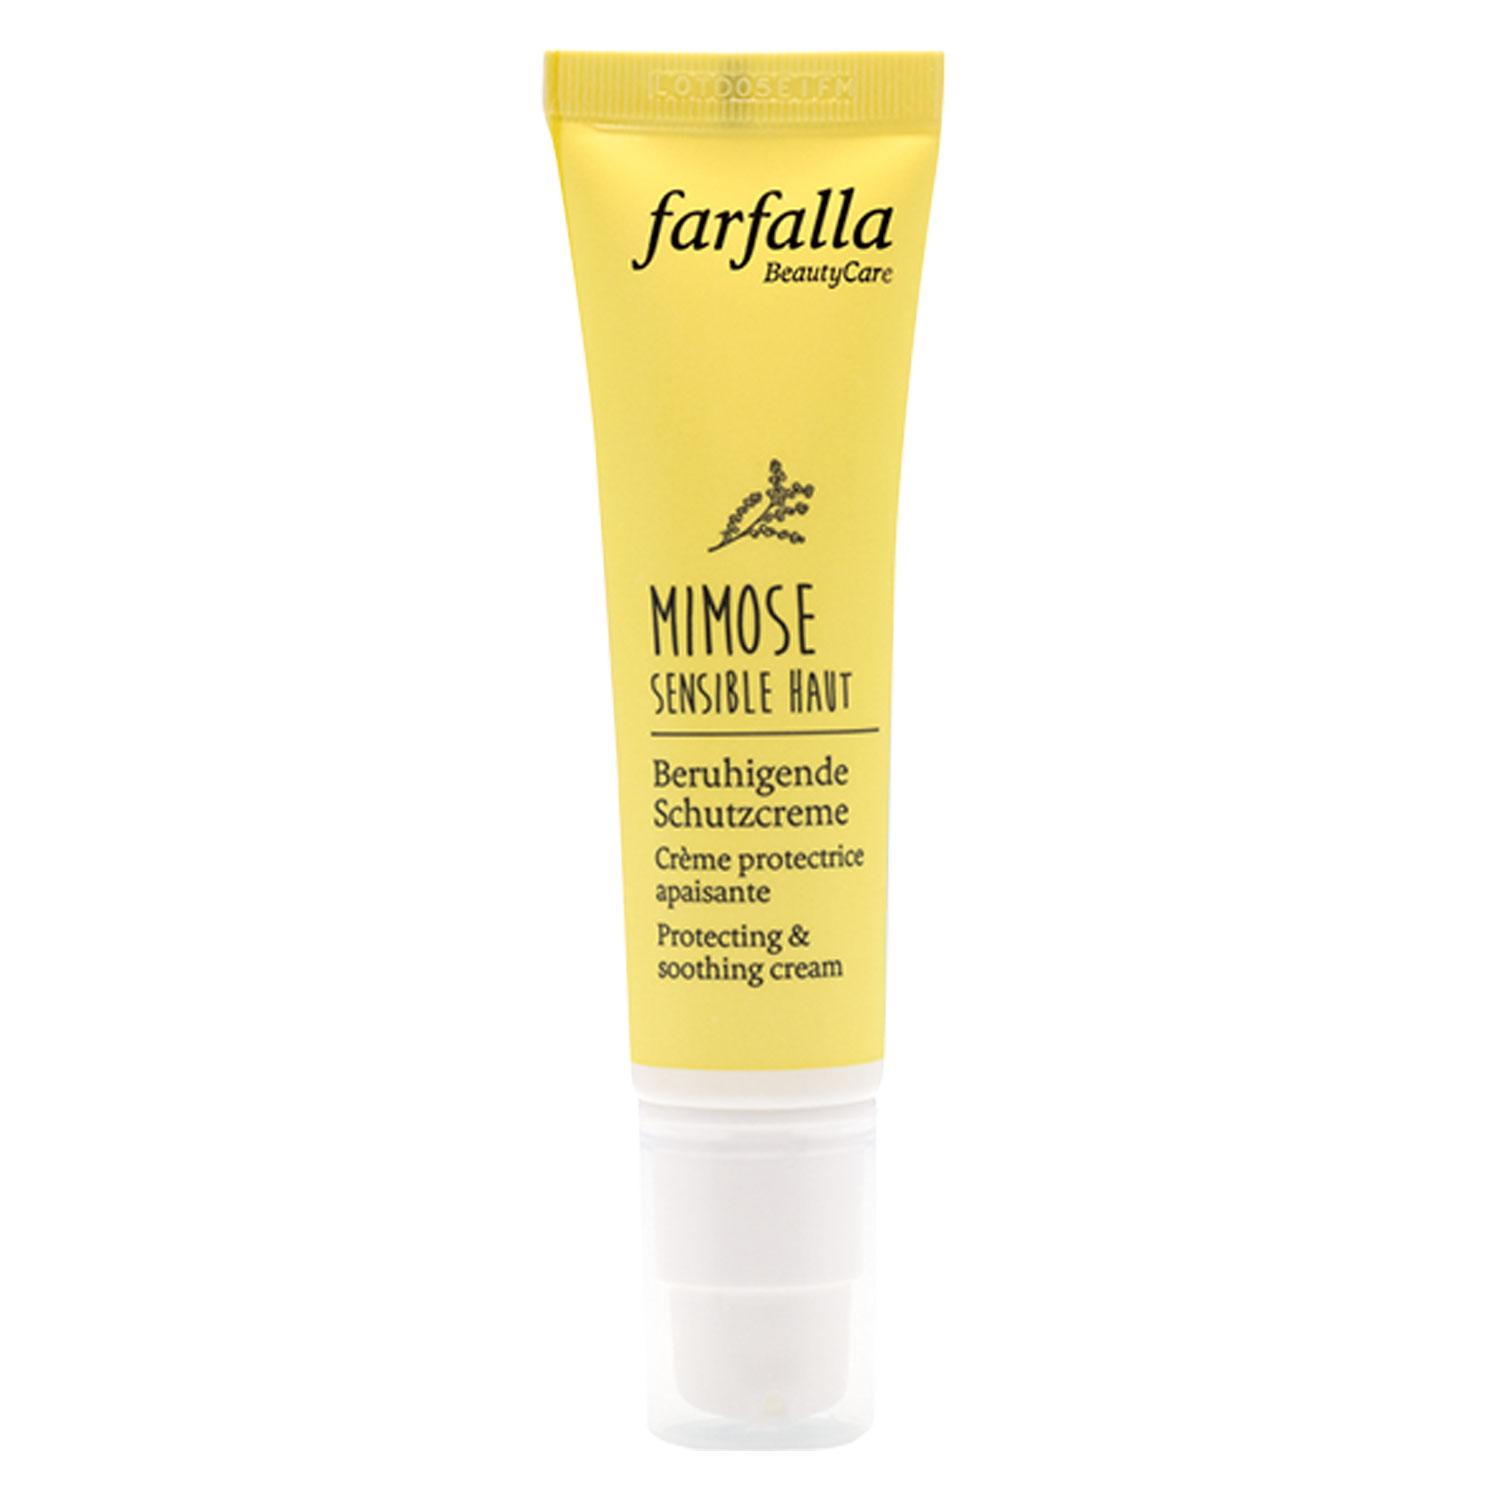 Mimose Sensible Haut - Protecting & soothing cream